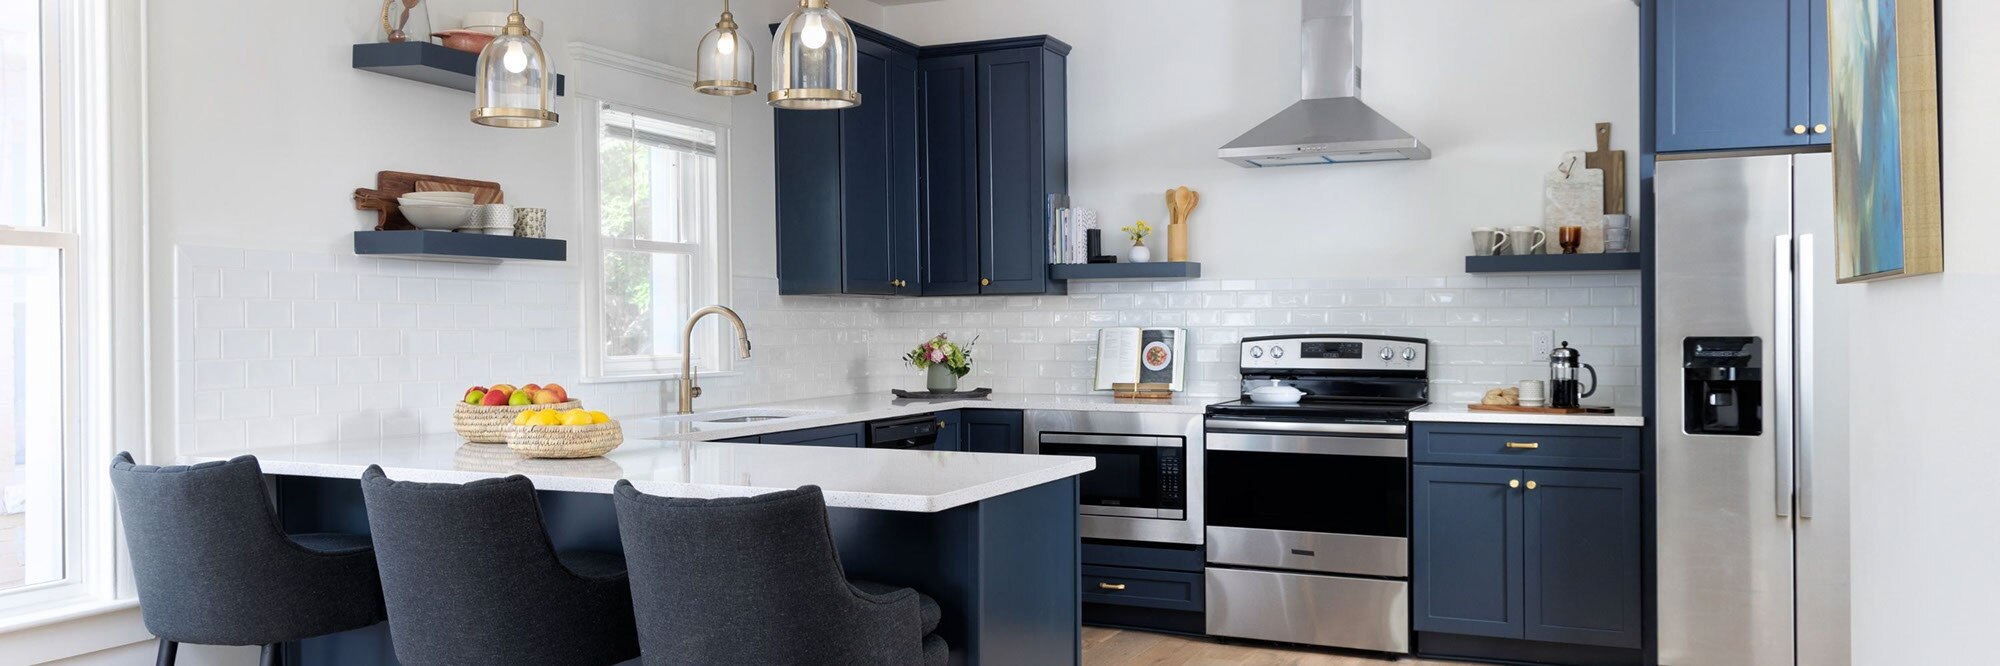 Renovated kitchen with navy cabinets and floating shelves, white glossy subway tile backsplash, white quartz countertops, and stainless steel appliances.